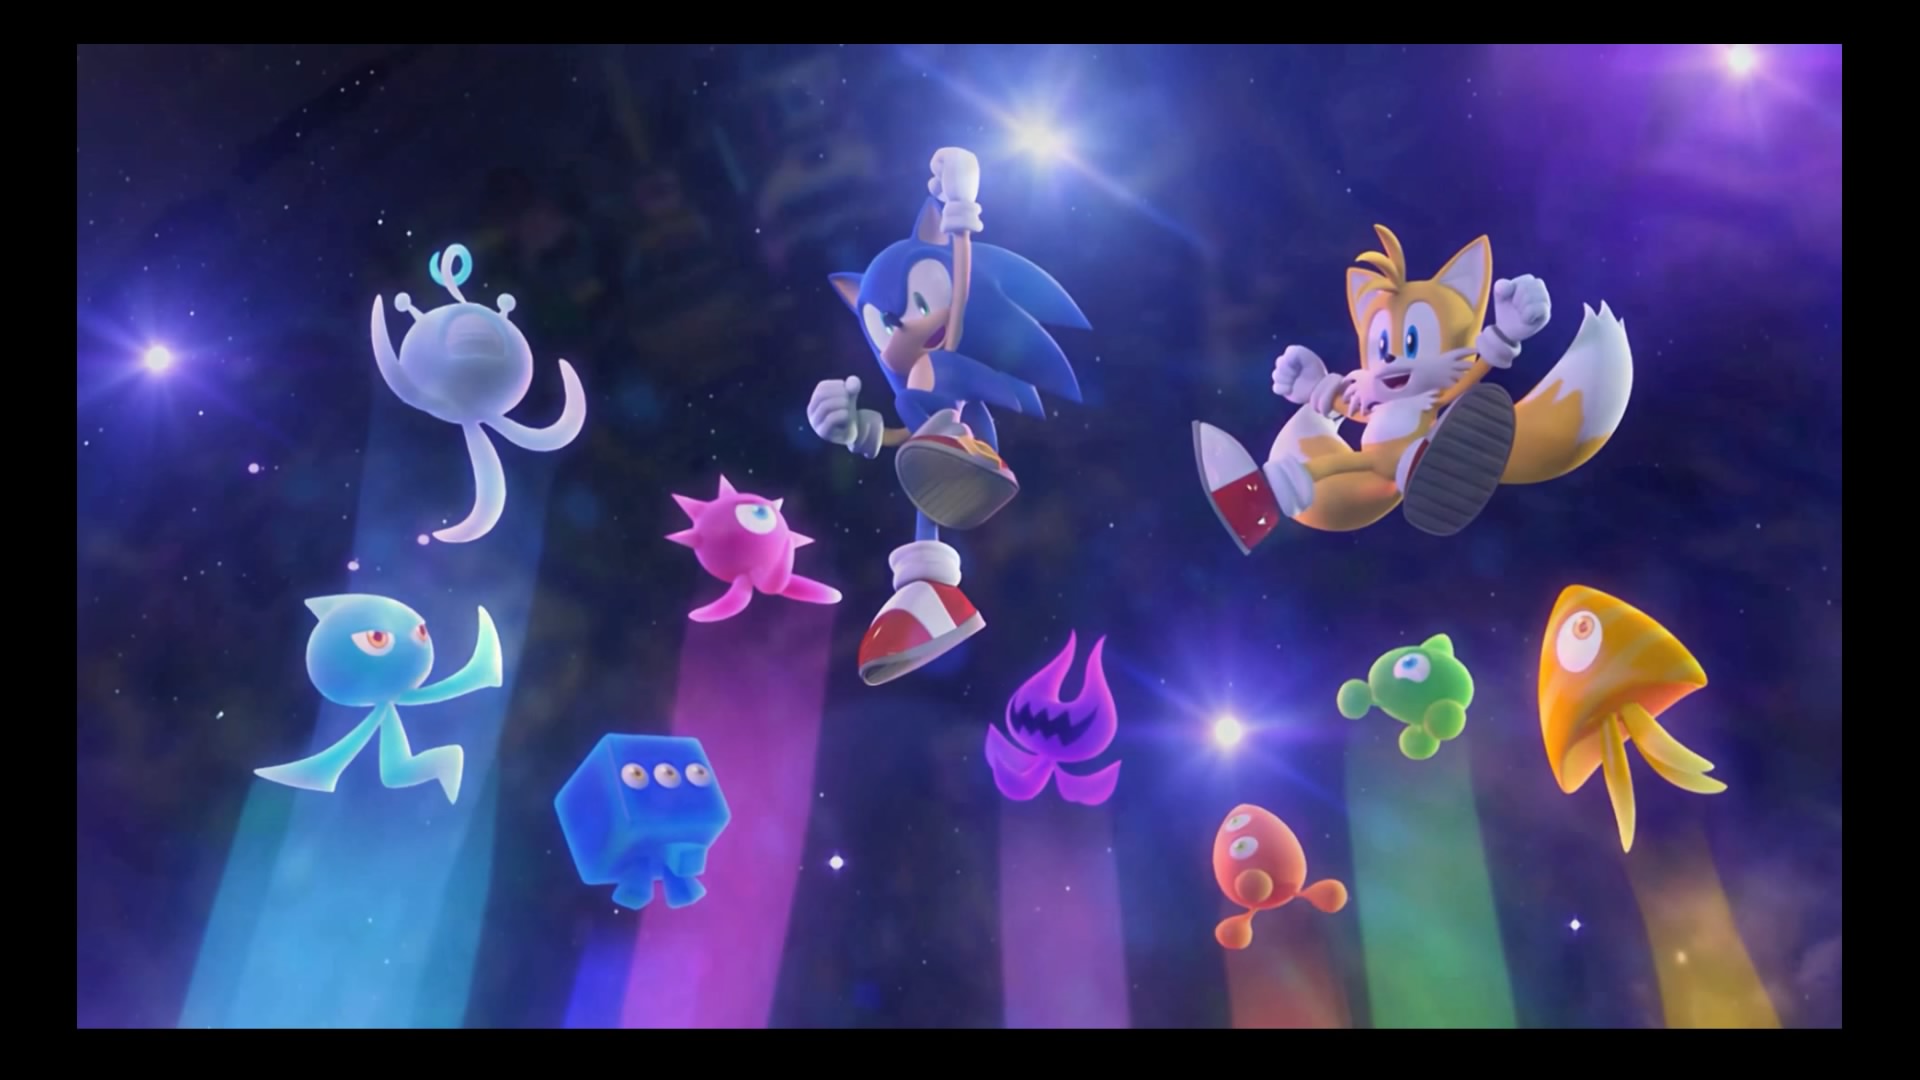 sonic colors opening